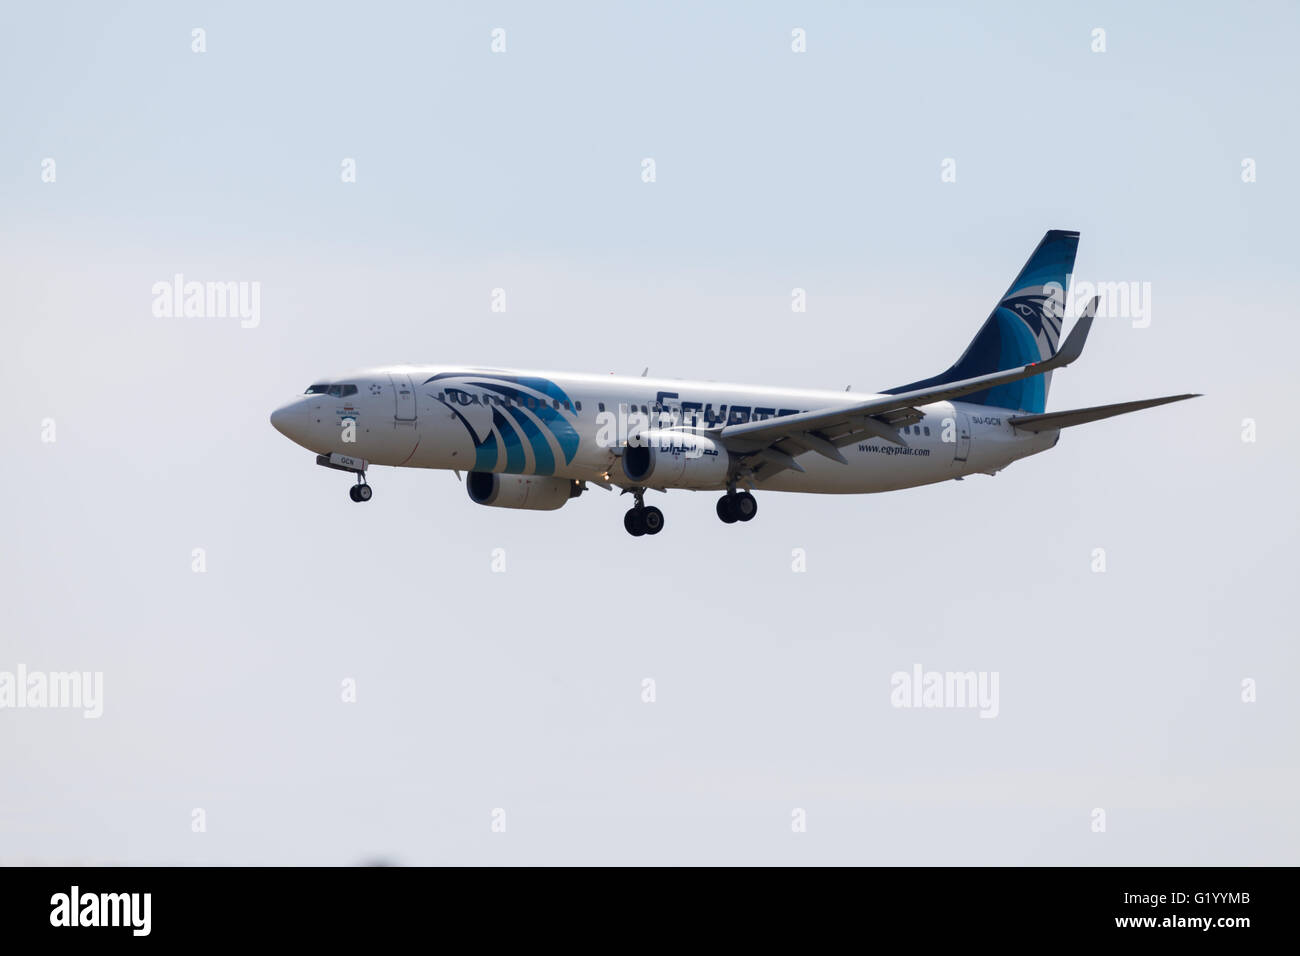 BERLIN / GERMANY - AUGUST 1, 2015: Boing 737 - 800, EgyptAir plane lands on airport tegel at august 1,2015 in berlin / germany. Stock Photo